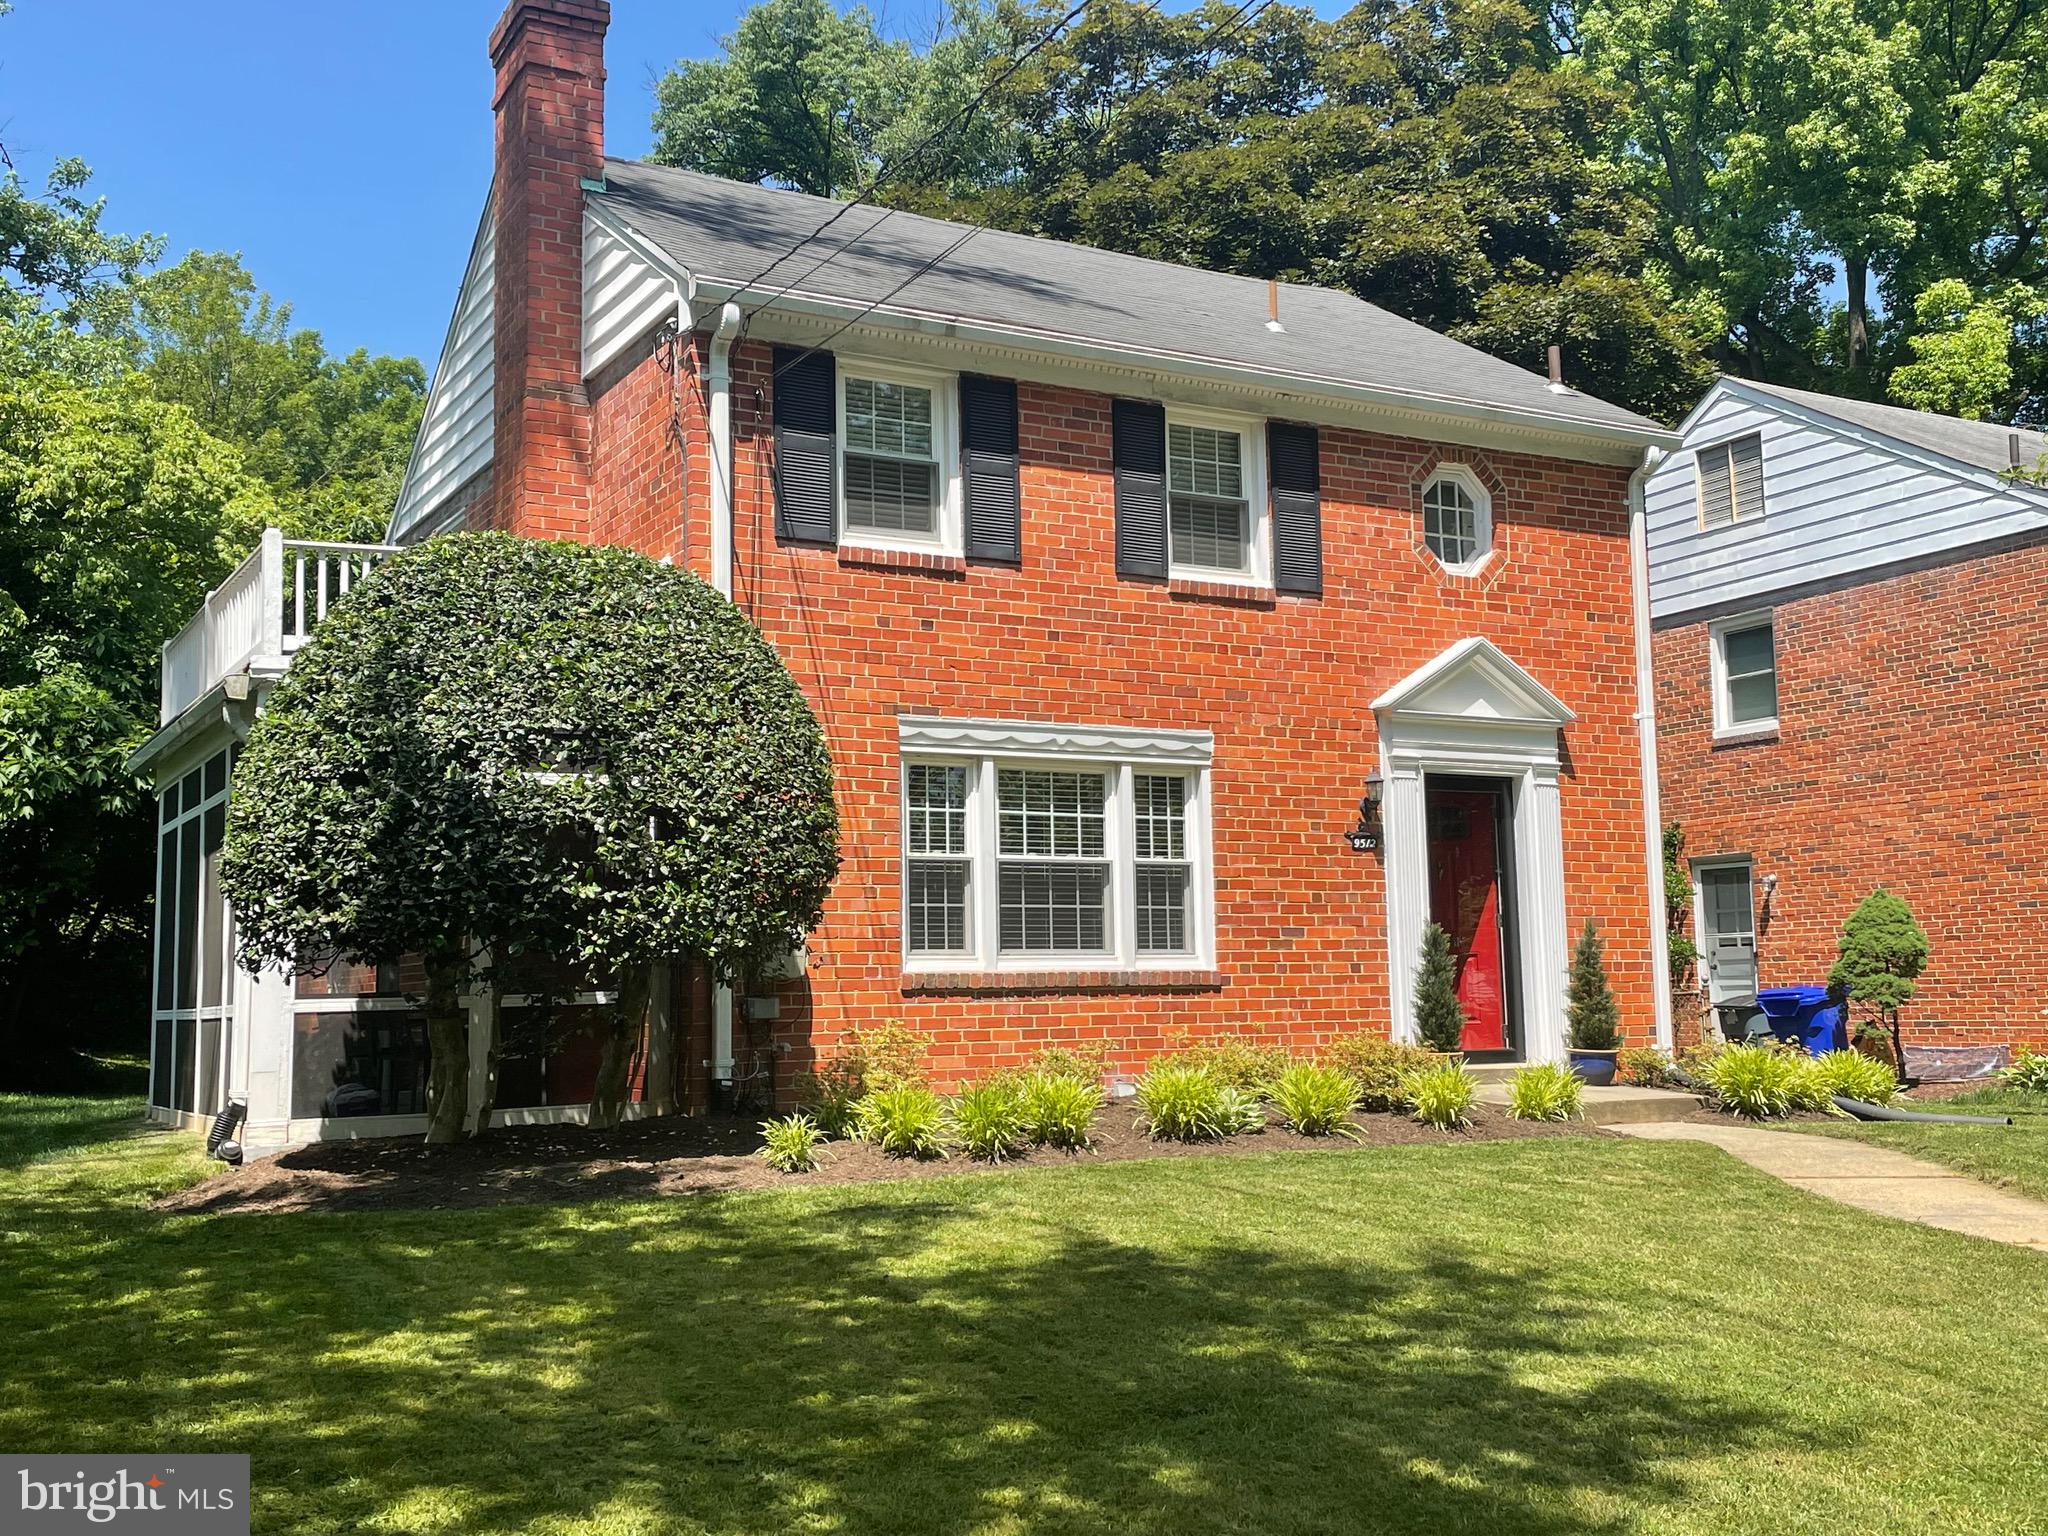 Welcome to 9512 Saybrook Avenue, a beautiful 3-bedroom classic brick colonial home in the sought- af